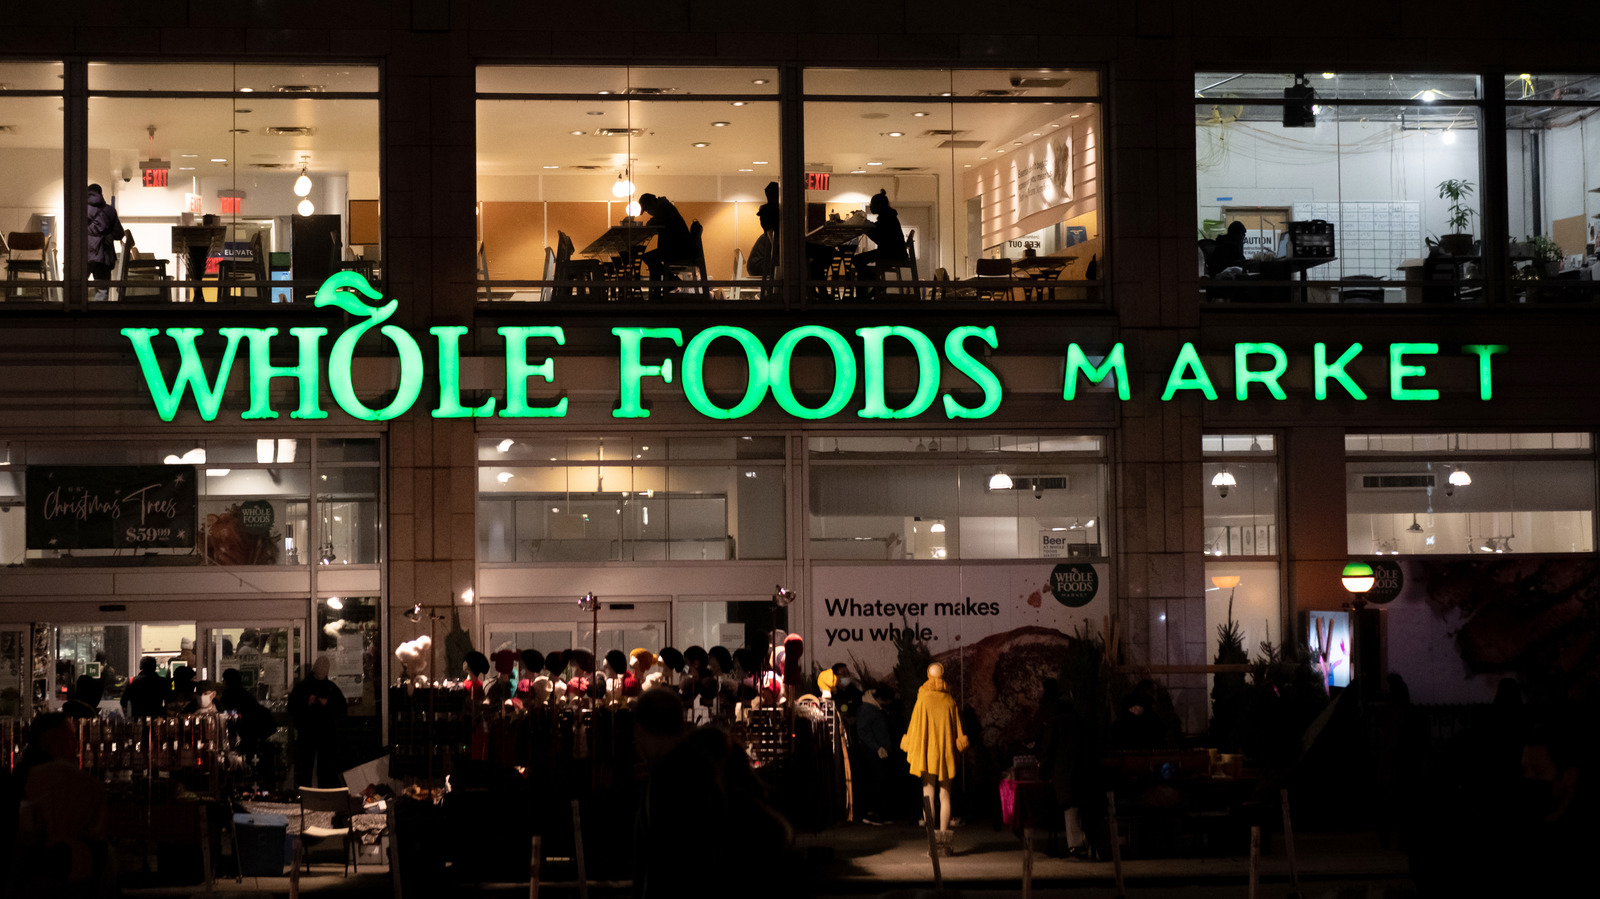 Why This CompanyWide Email From One Whole Foods Employee Is Causing